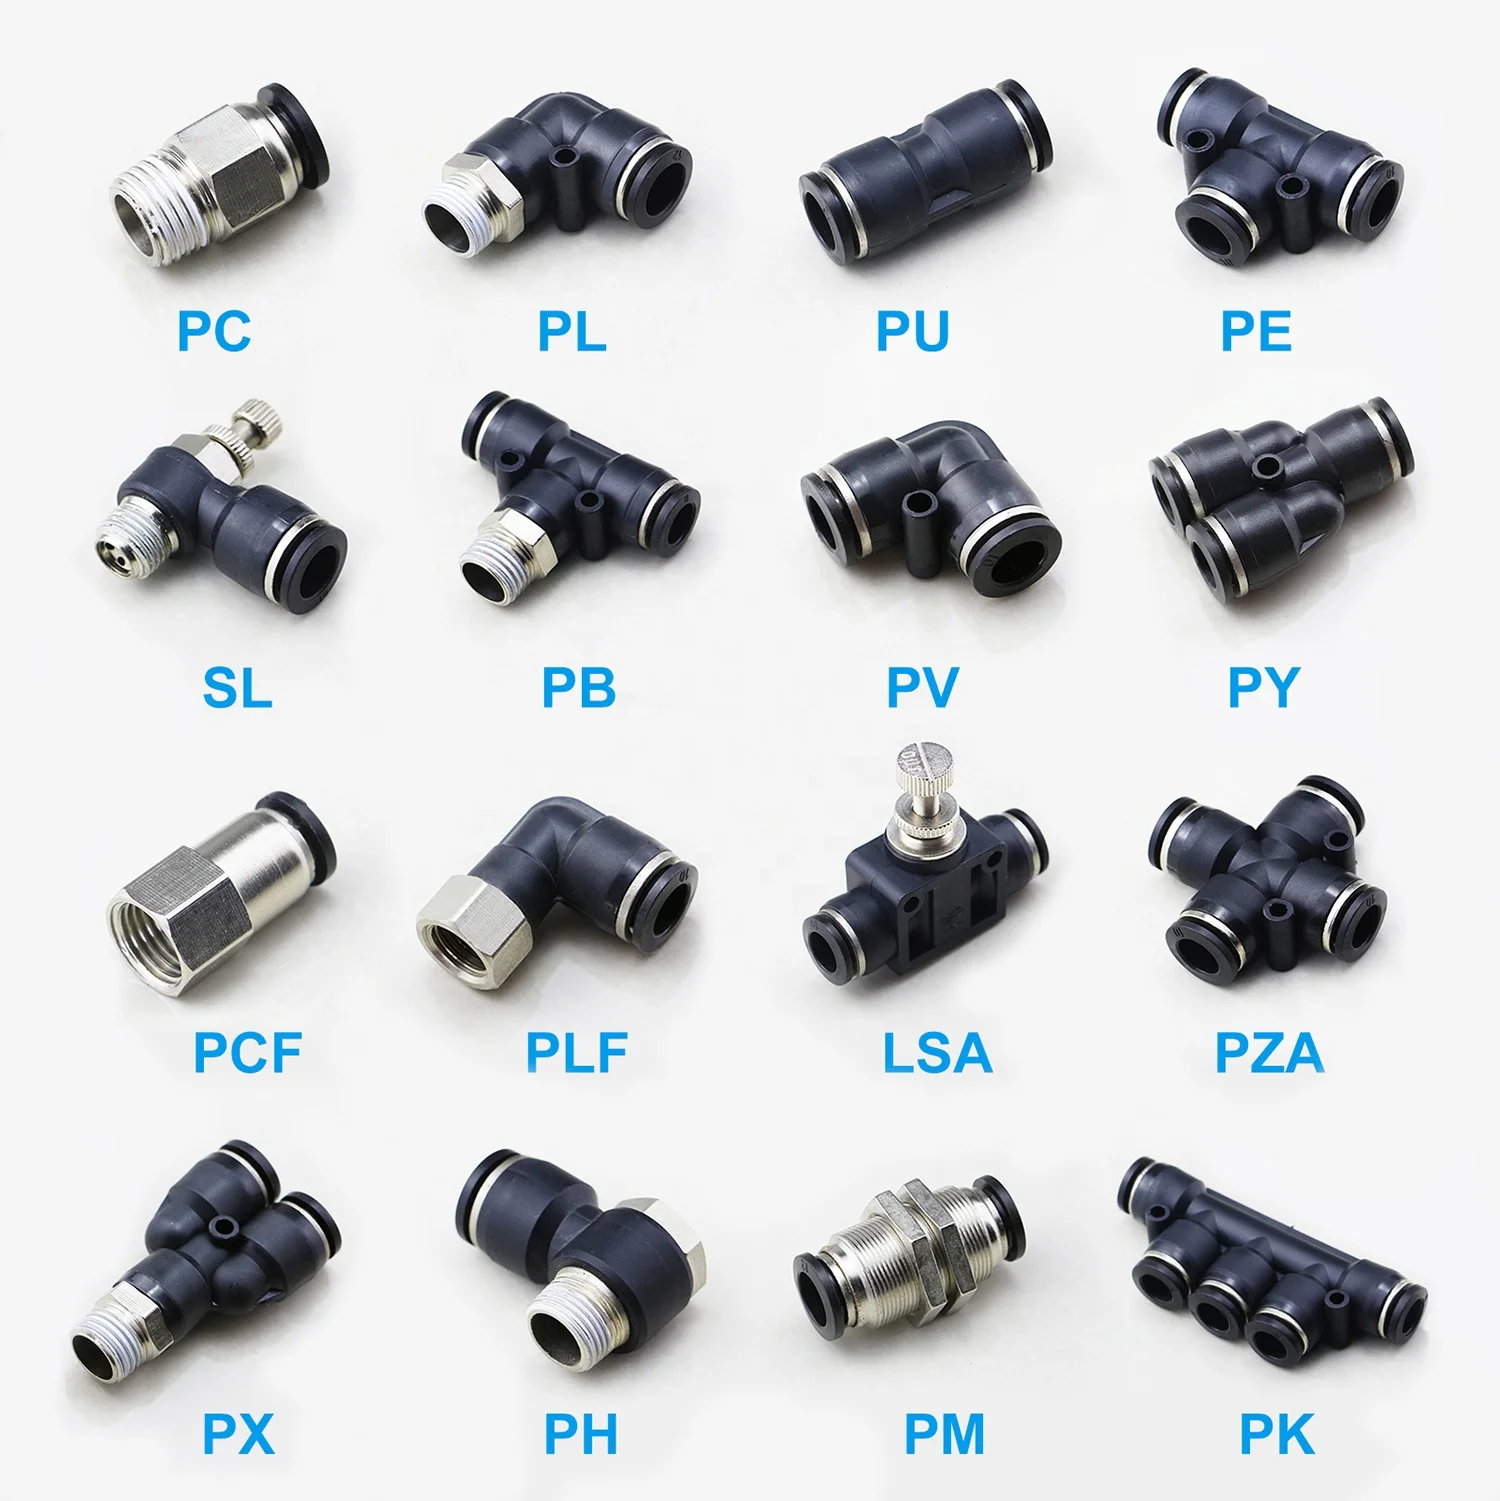 Details about   10pc 2 Way Straight Push In Pneumatic Union Quick Release 1/4" 6mm Tube Fittings 